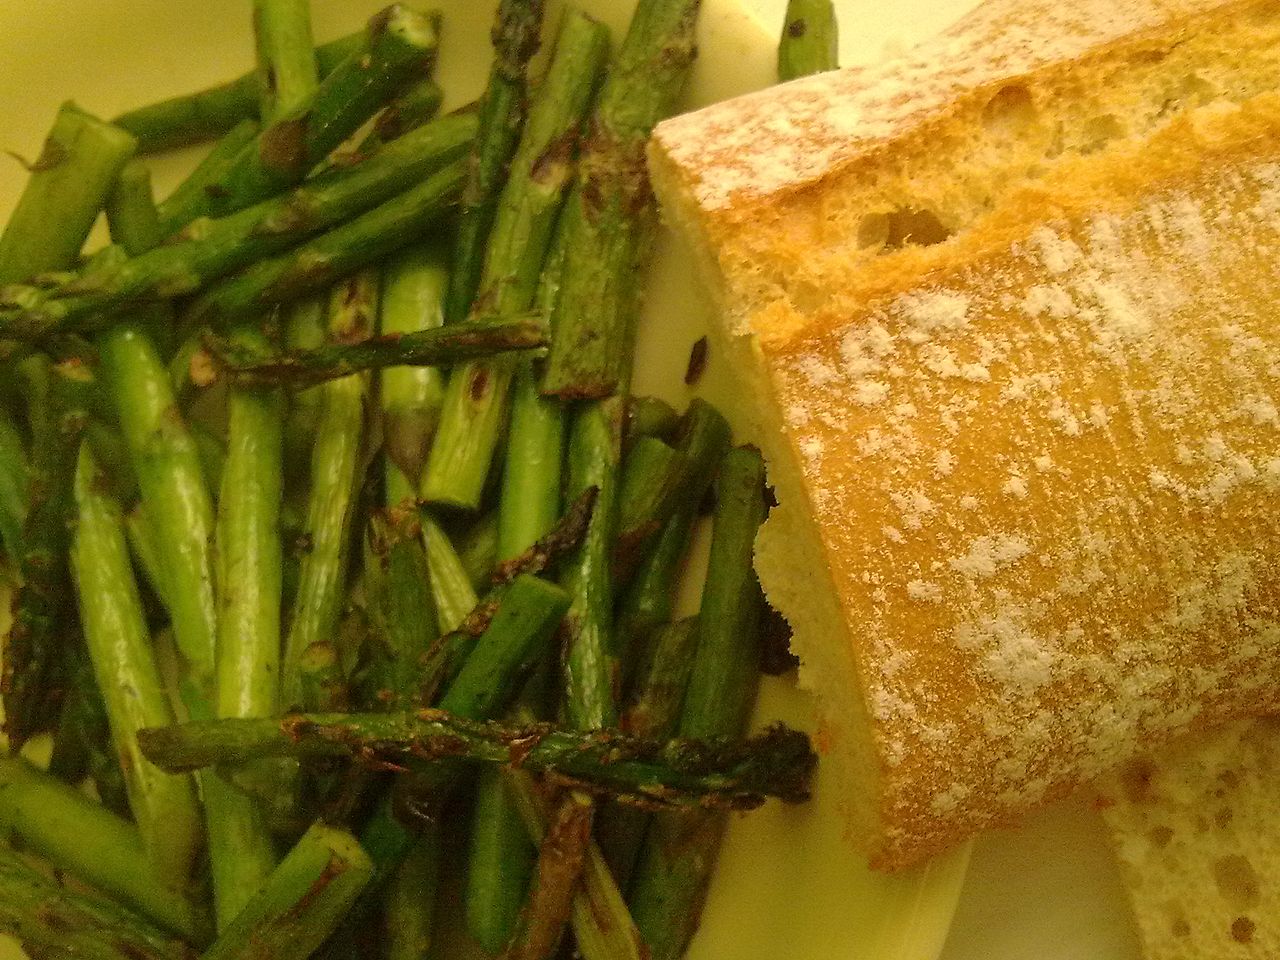 Discover how to cook fresh asparagus is many ways